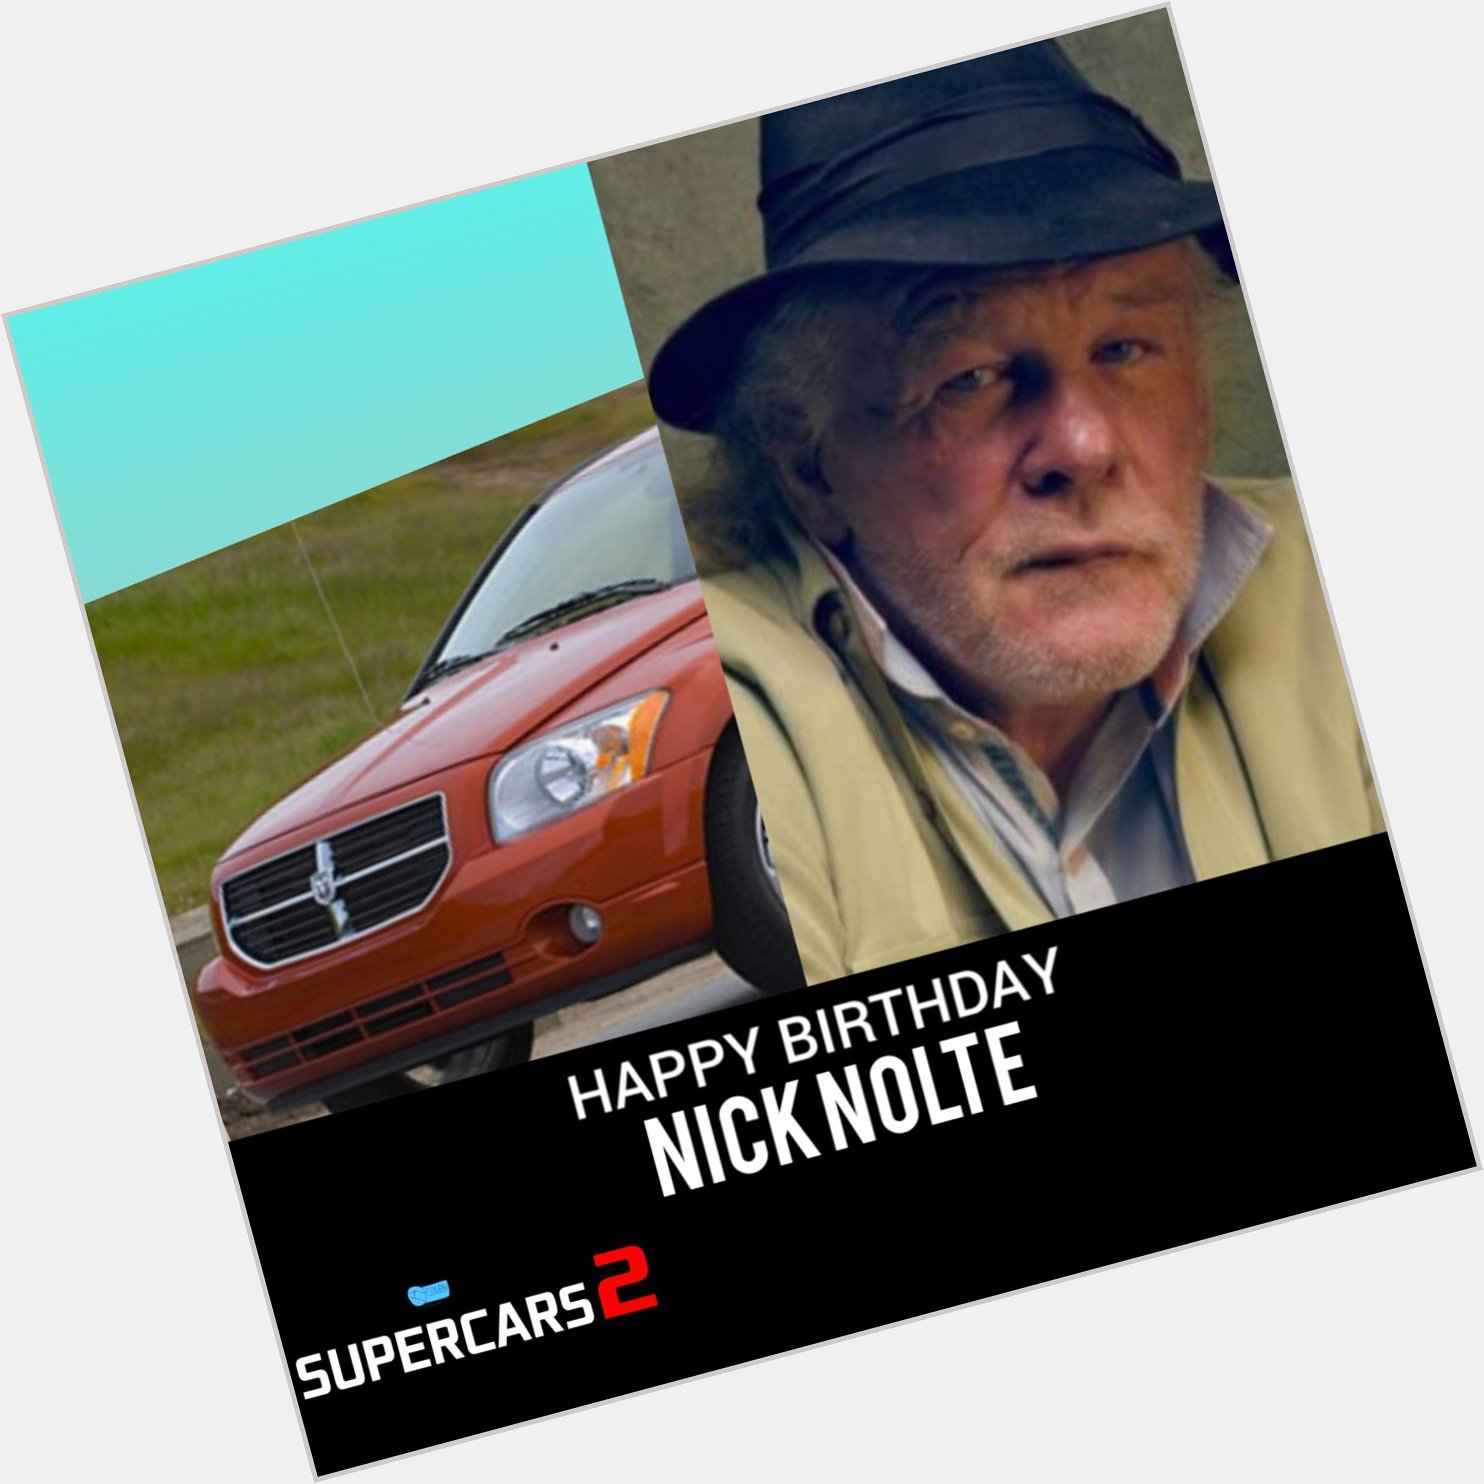 SUPERCARS 2 wish to say Happy Birthday to Nick Nolte .  